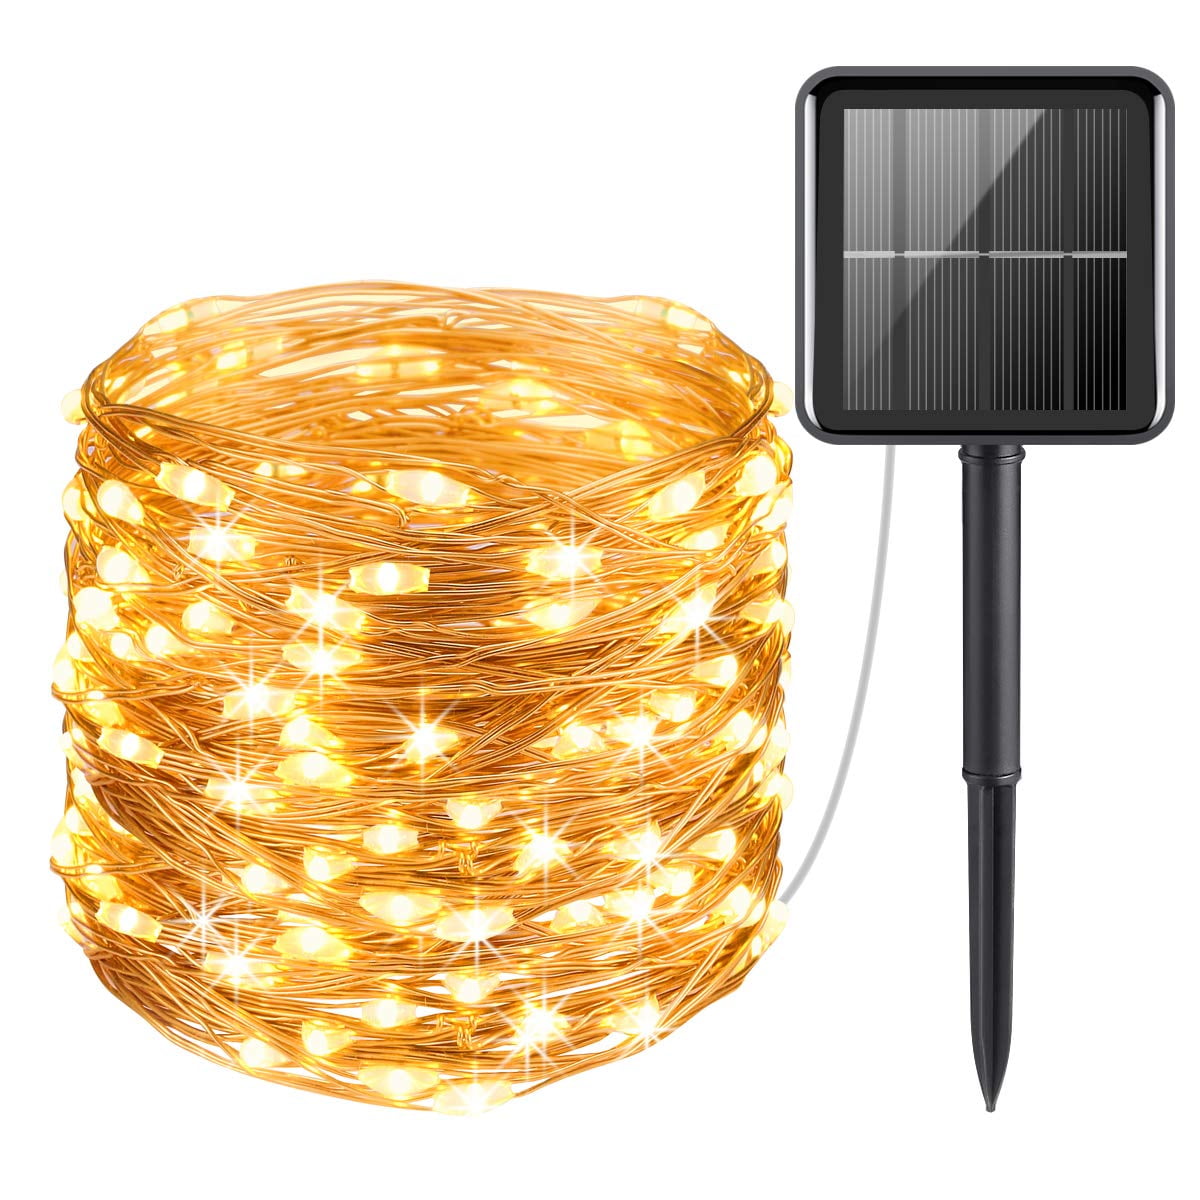 10M 33FT 100LED Solar powered Warm White Copper Wire Outdoor String Fairy Light 